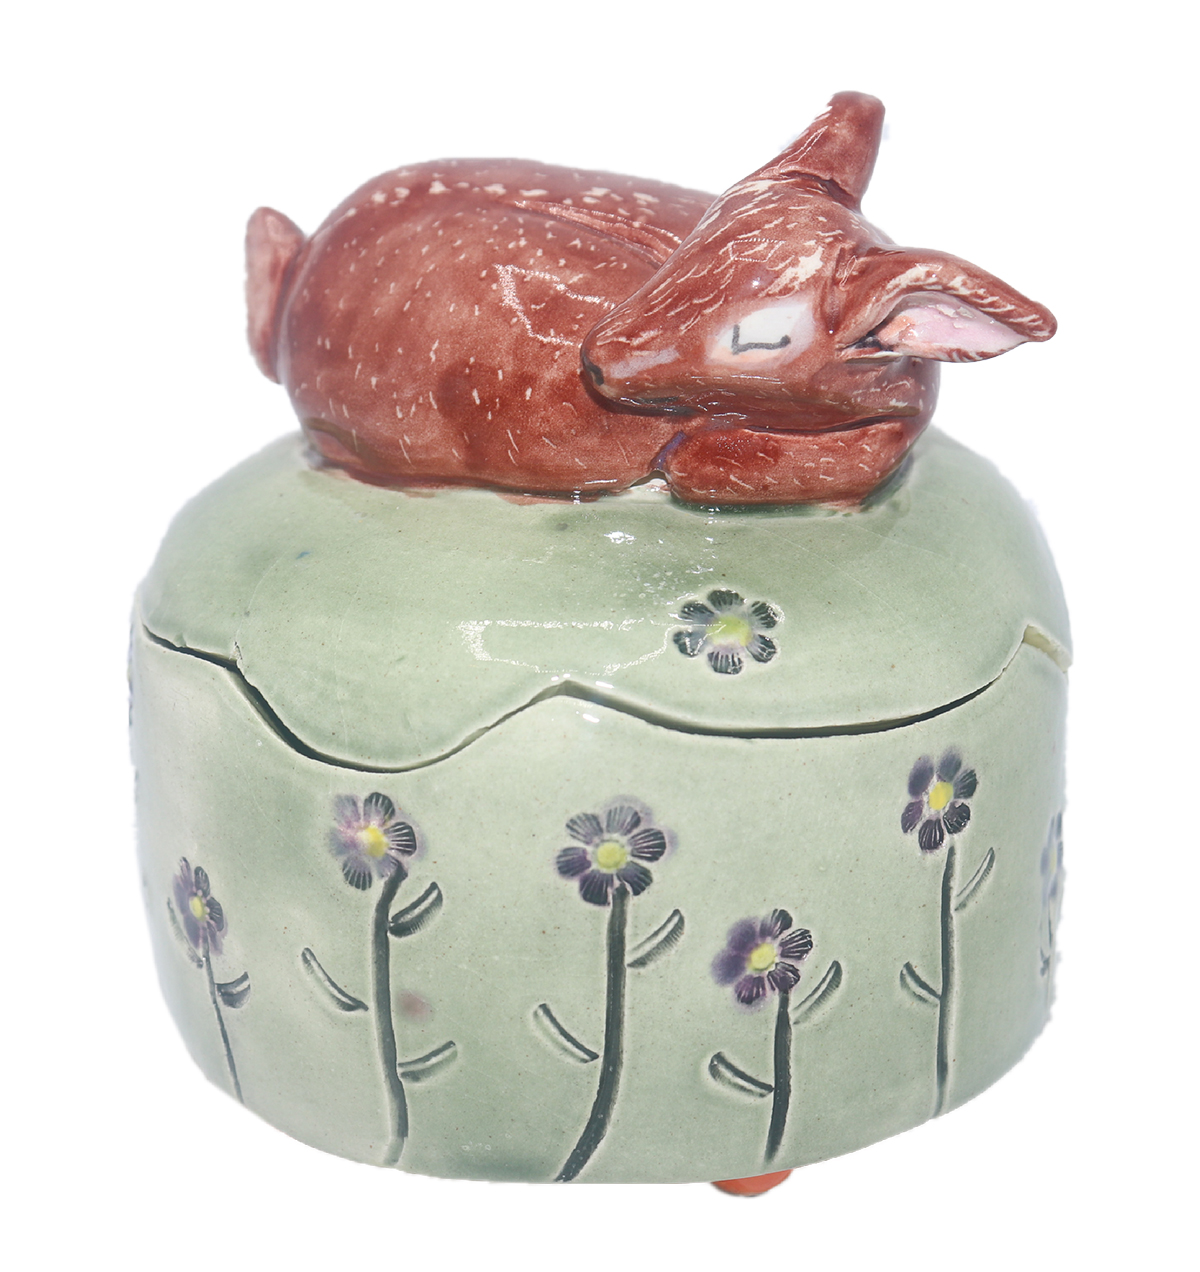 MARIA COUNTS - LIDDED BOWL WITH FAWN - CERAMIC - 3.25 x 3.5 x 3.25